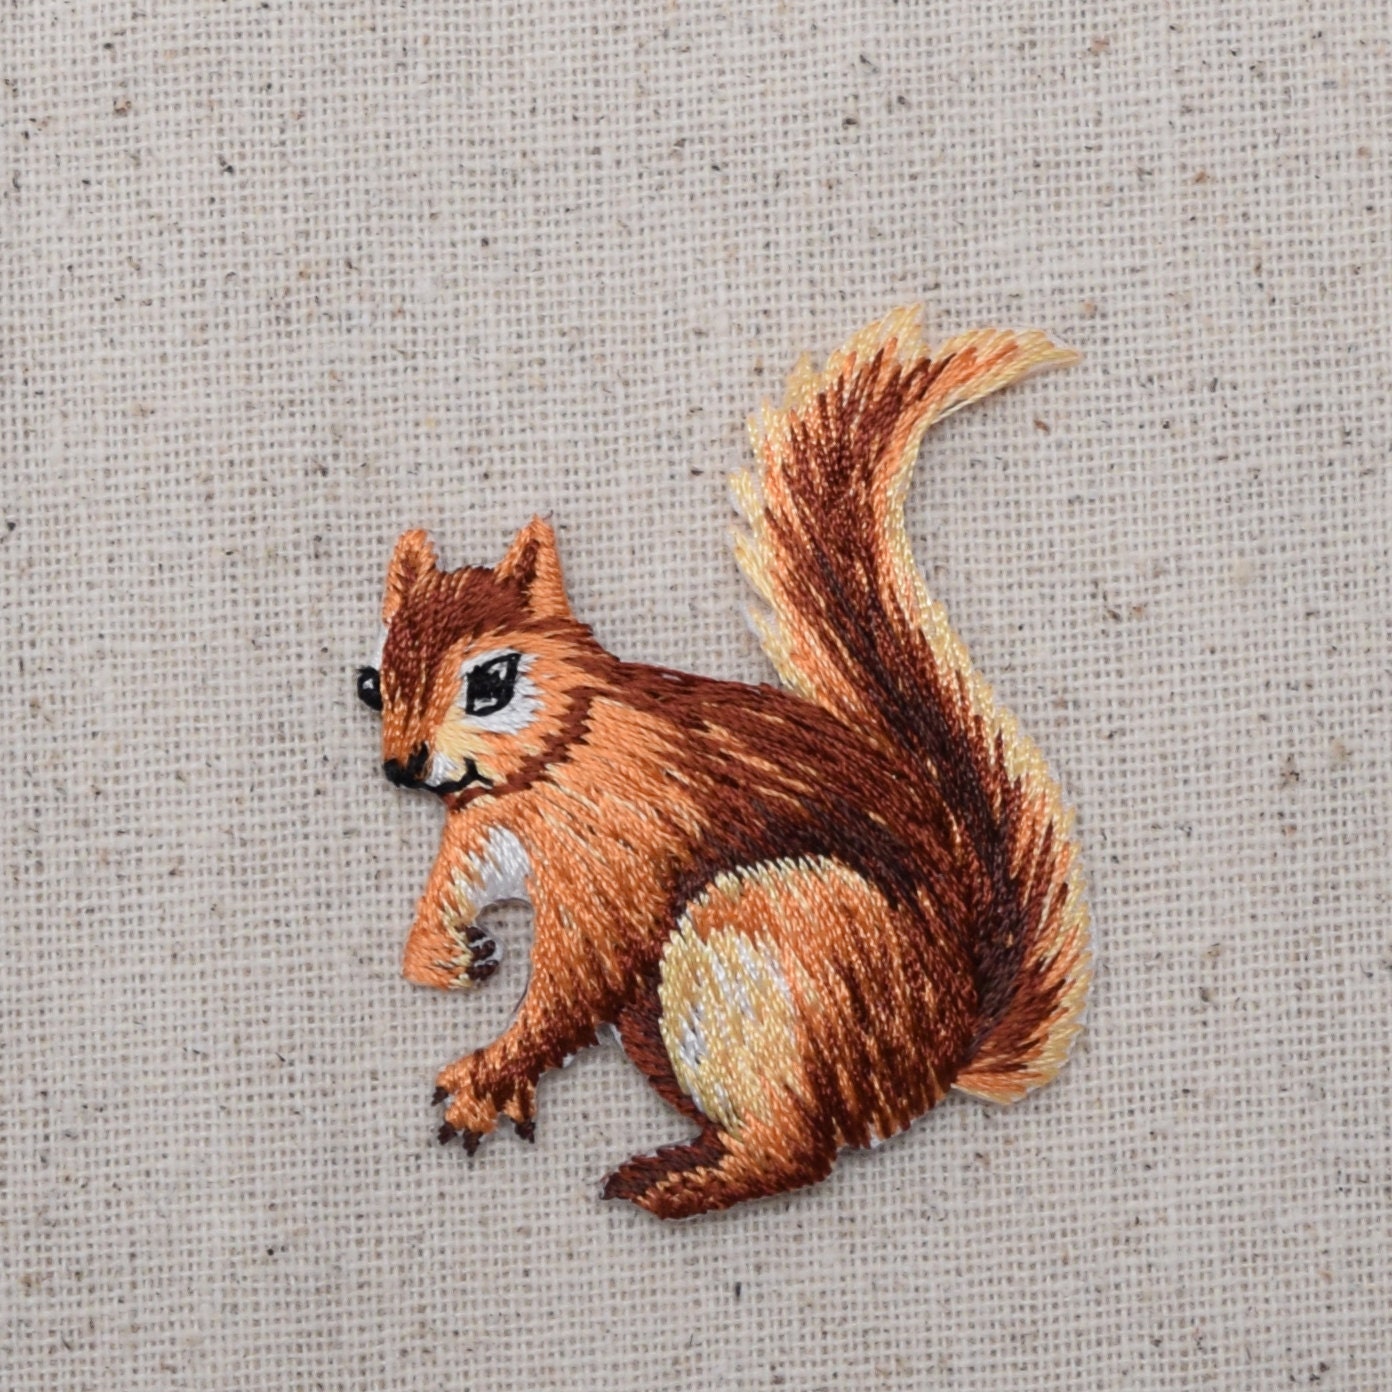 Sewing Embroidery Squirrel Sticker/Stitch Patch Iron On Patch Squirrel Embroidered Patch-38x35mm Animal Embroidered Patchwork